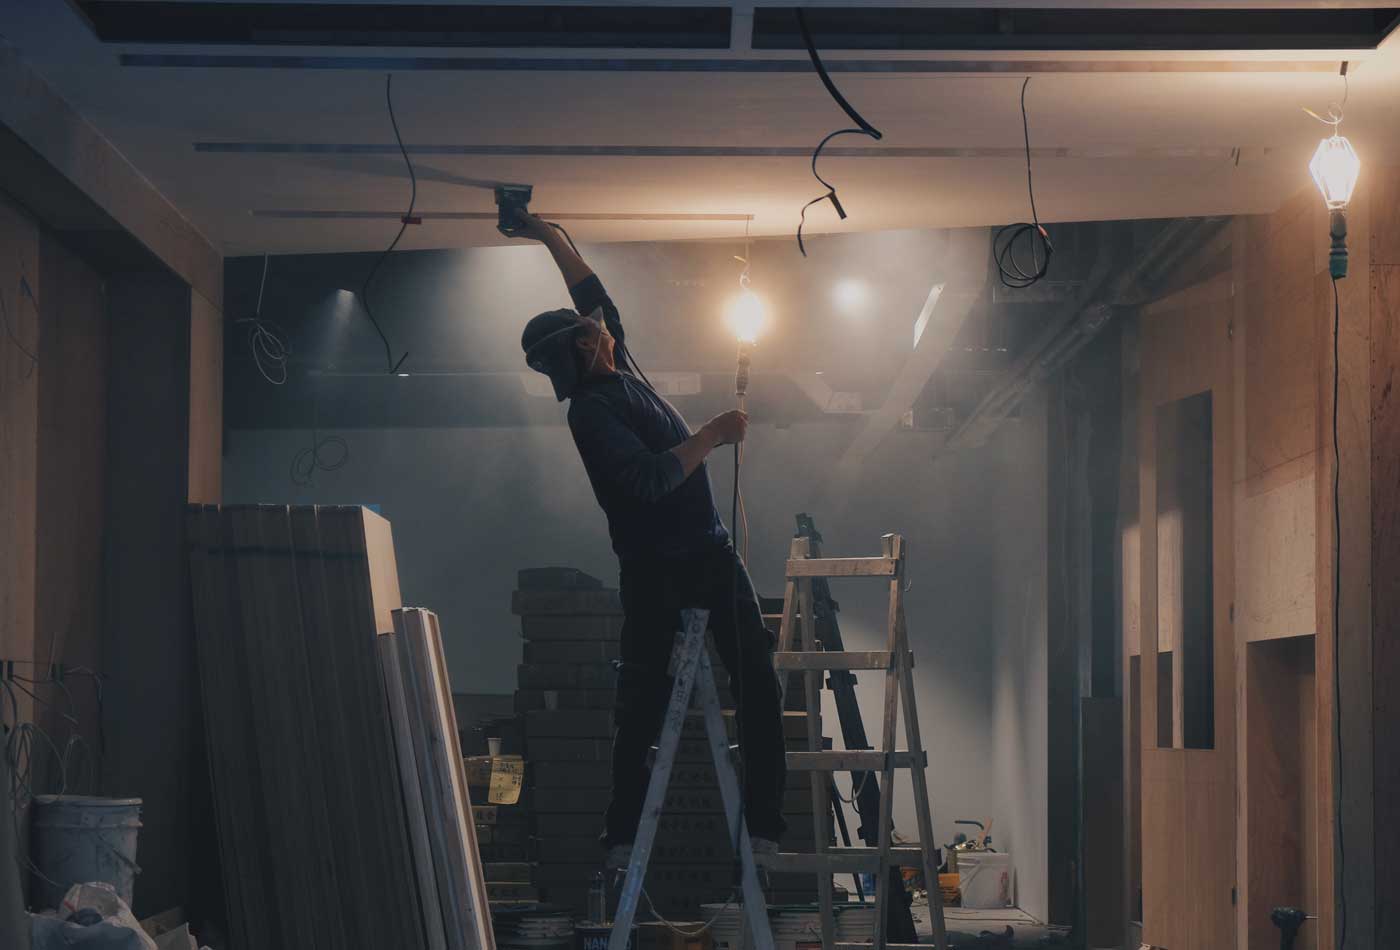 Shows a construction worker marking a ceiling